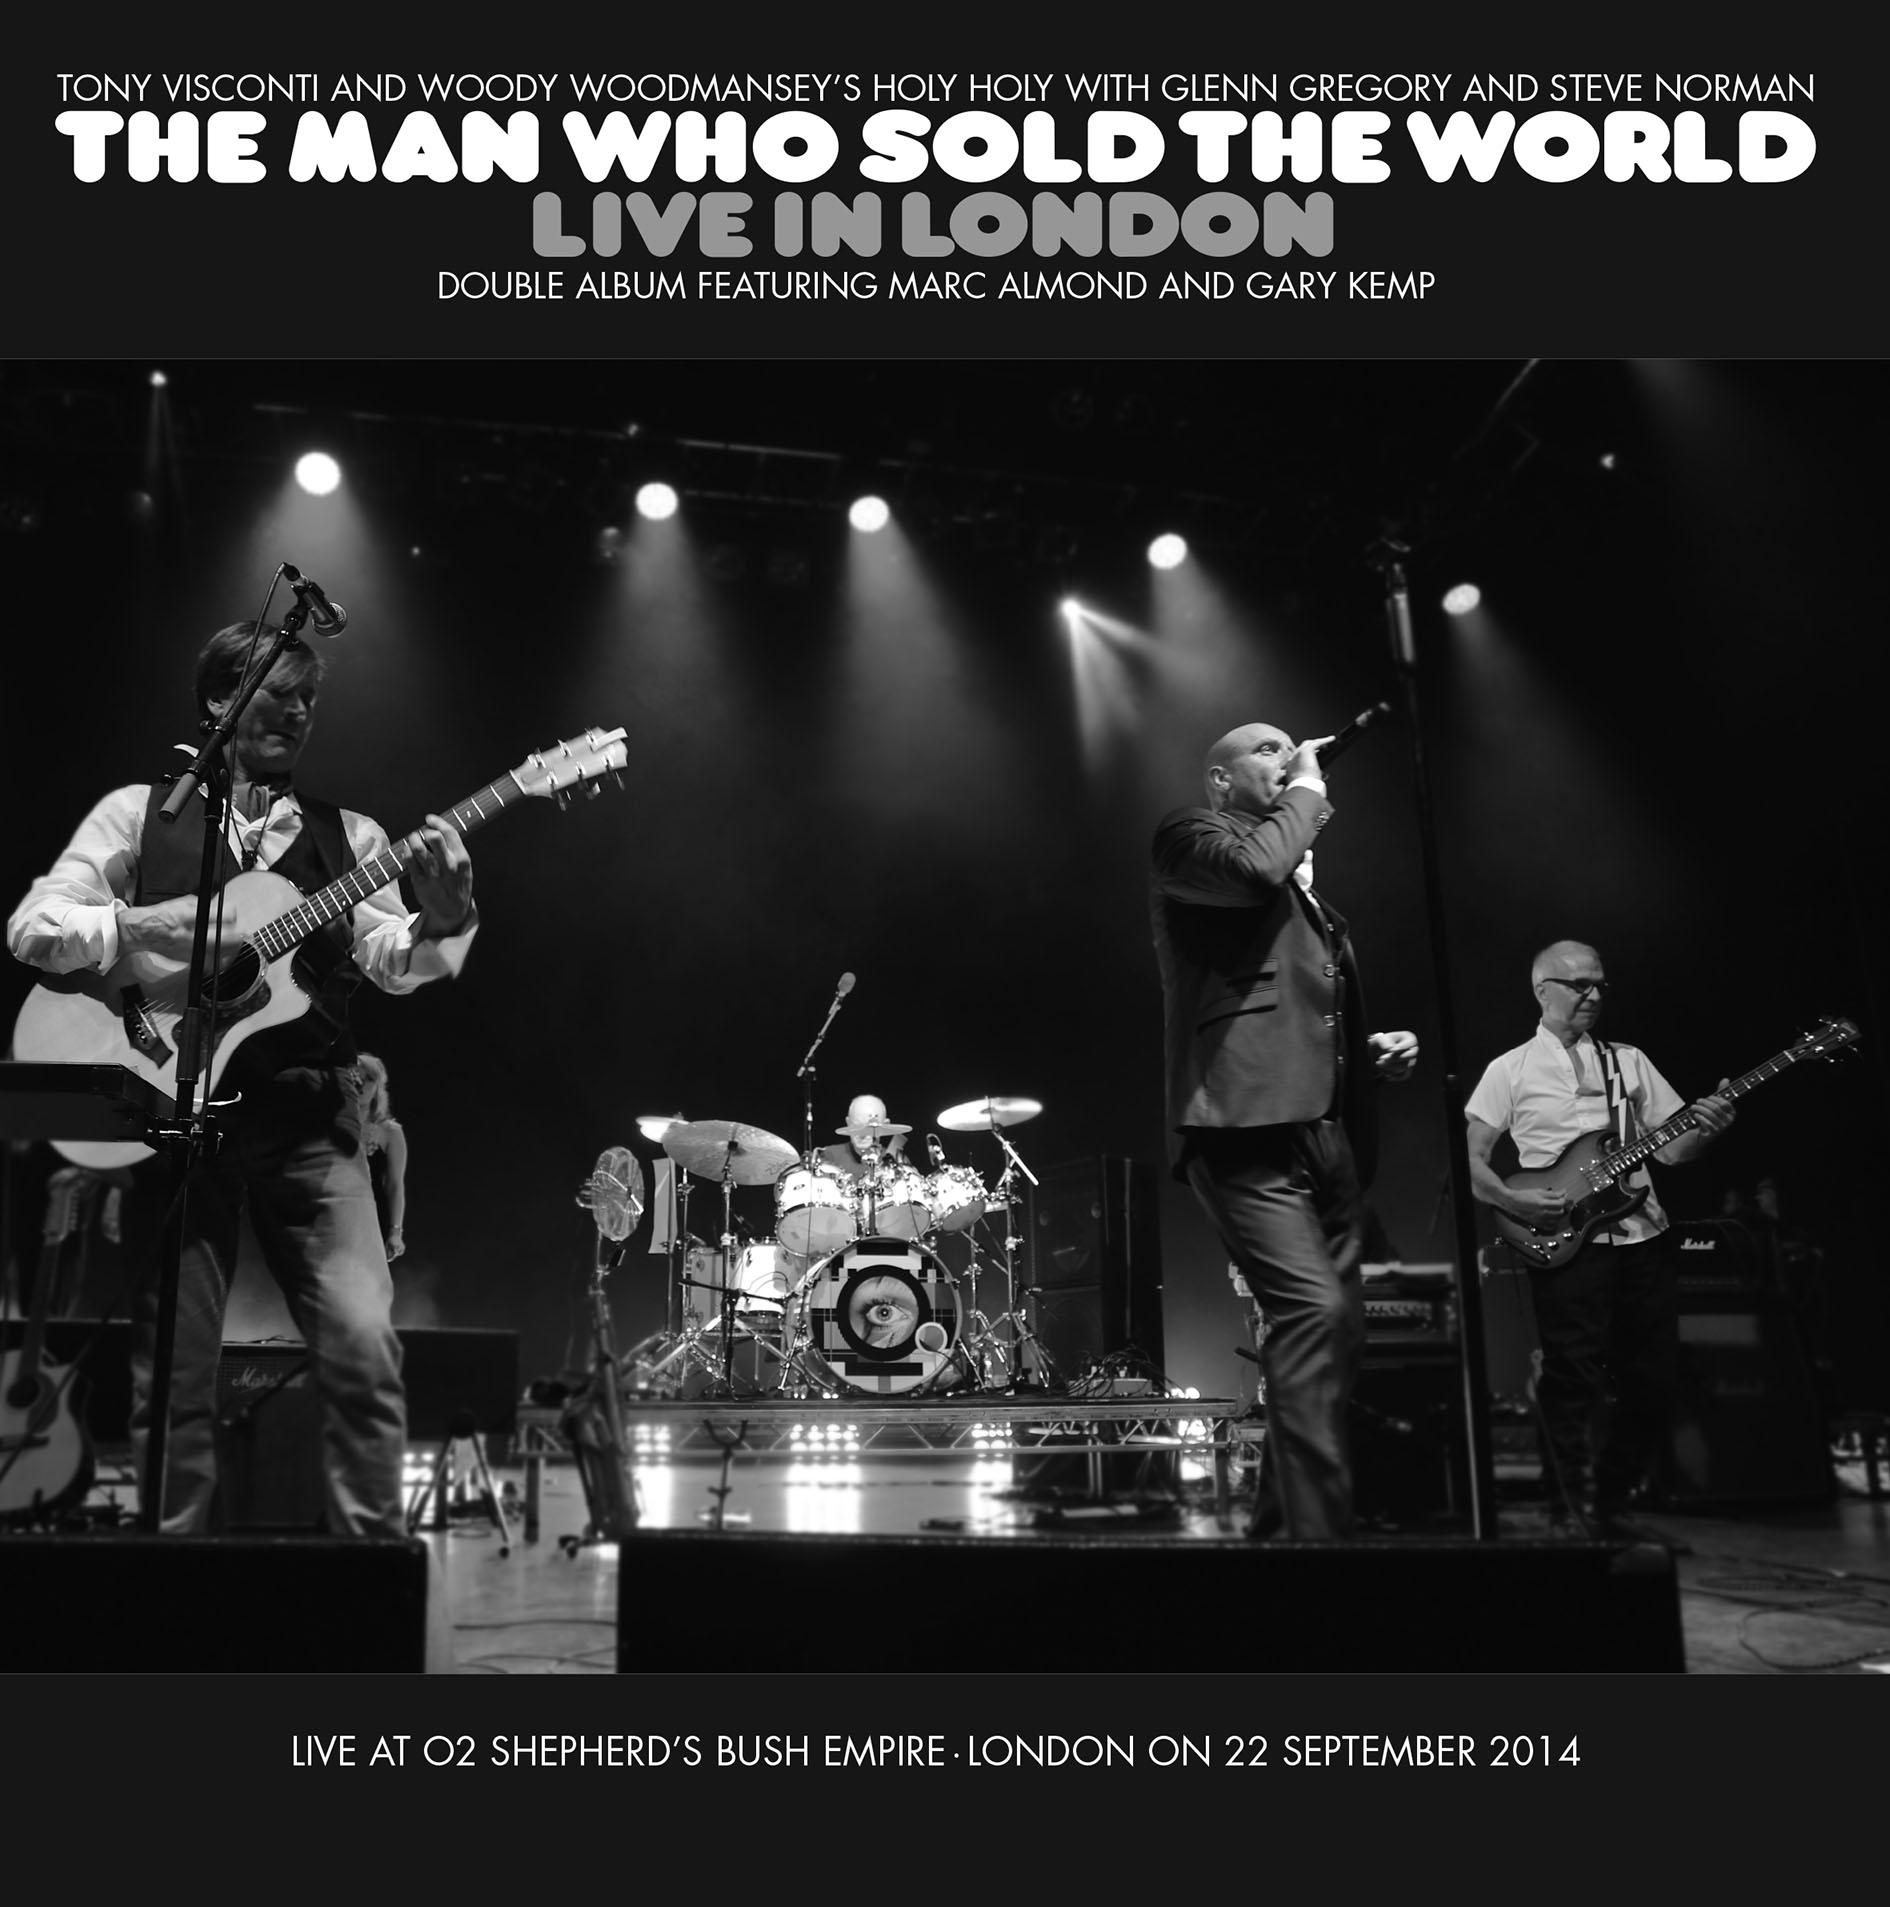 The Man Who Sold The World Live in London - Tony Visconti & Woody Woodmansey’s Holy Holy